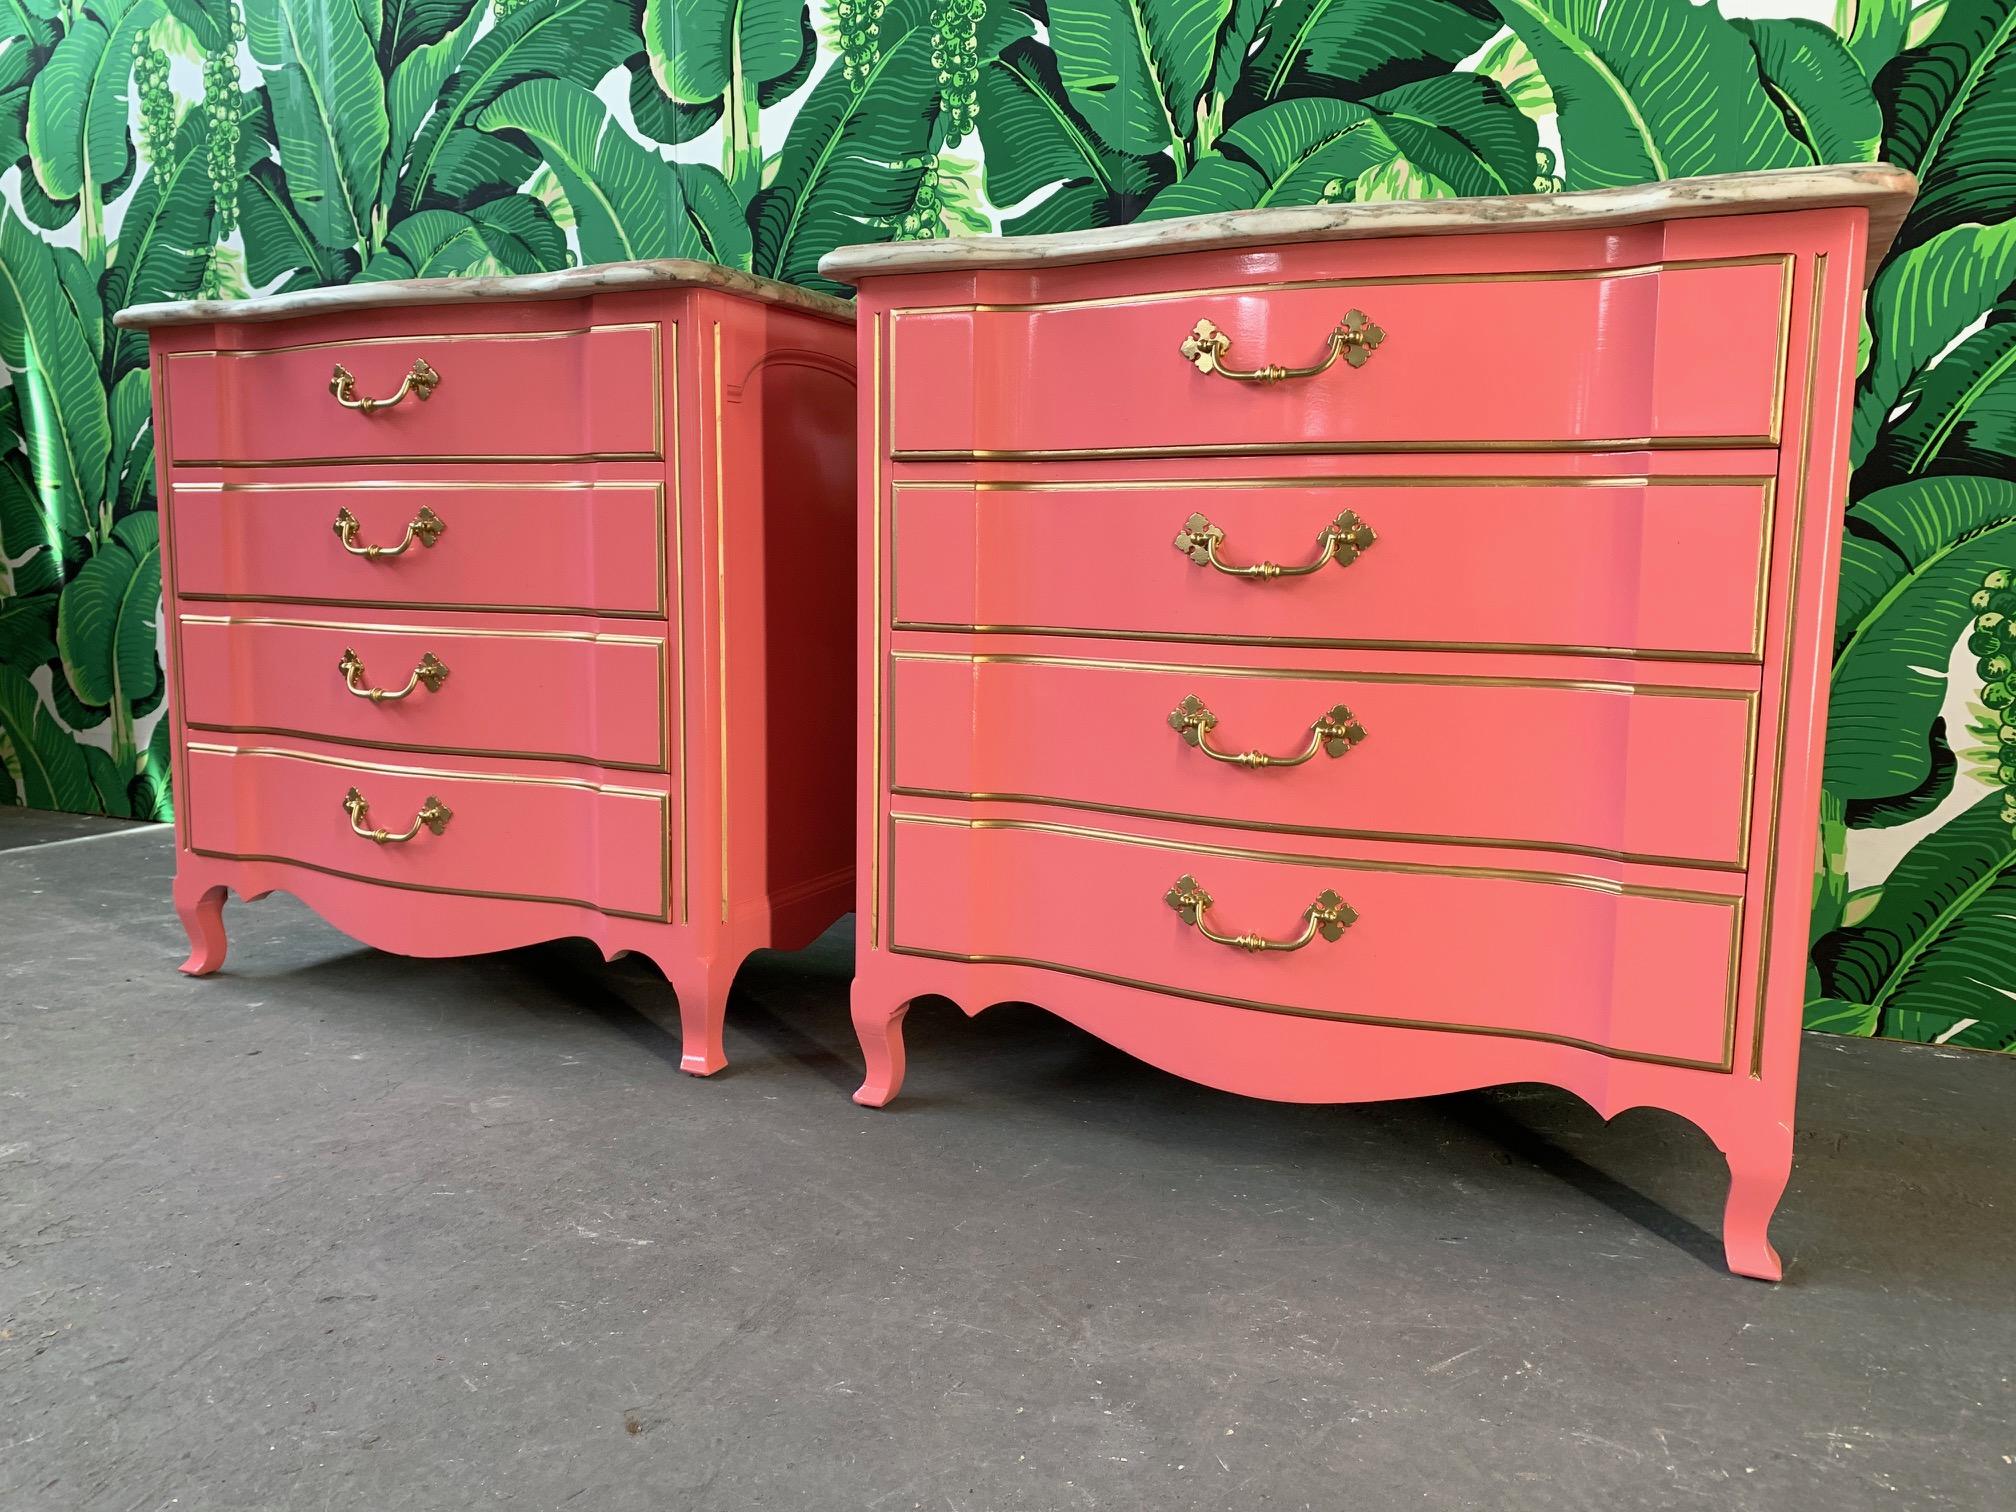 Newly restored pair of commodes by Wm. A. Berkey Furniture / John Widdicomb finished in high gloss pink lacquer. Marble tops and brass hardware, along with gold gilt detailing. Excellent condition with no cracks or chips to marble and only minor